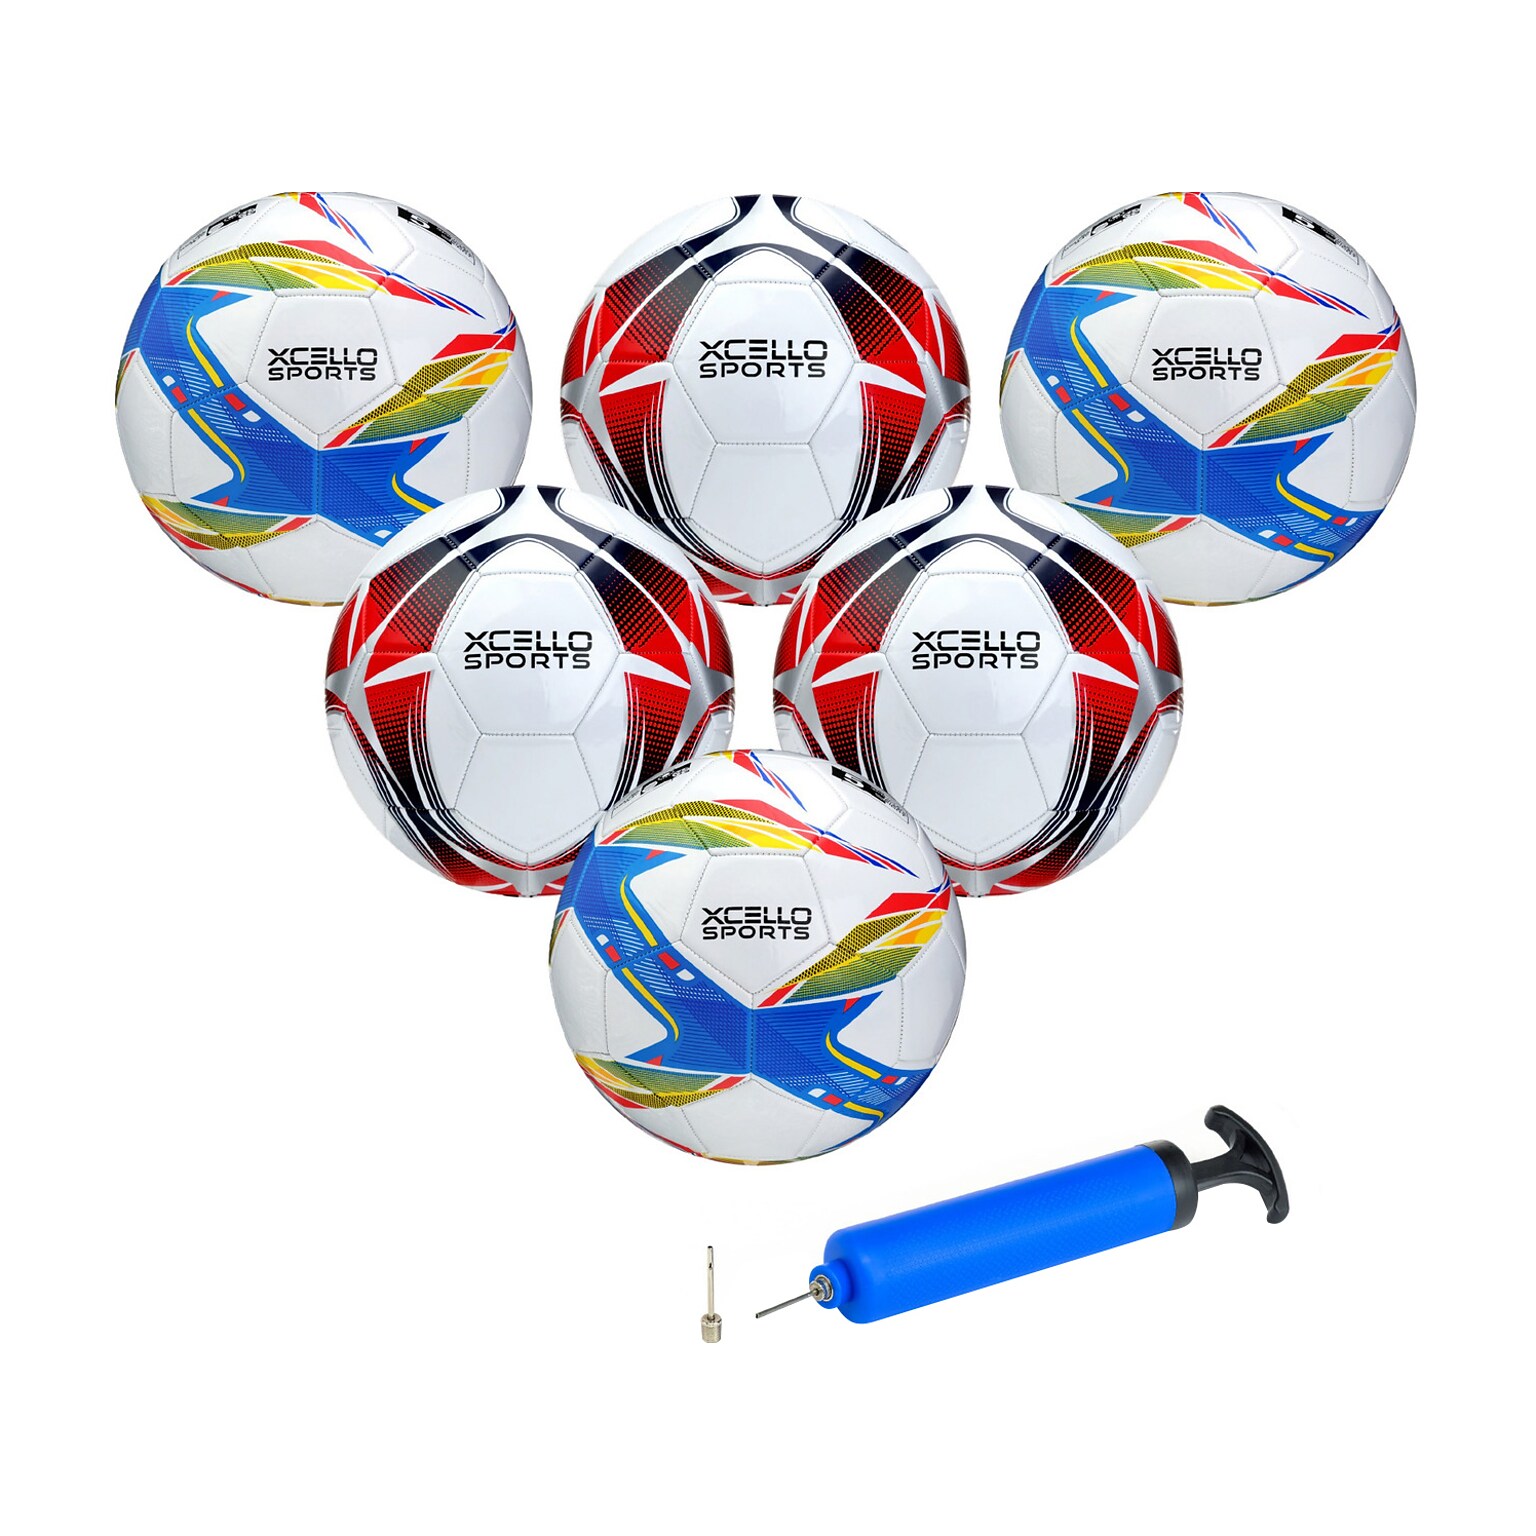 Xcello Sports Size 4 Soccer Balls, Assorted Colors, 6/Pack (XS-SB-S4-6-ASST)